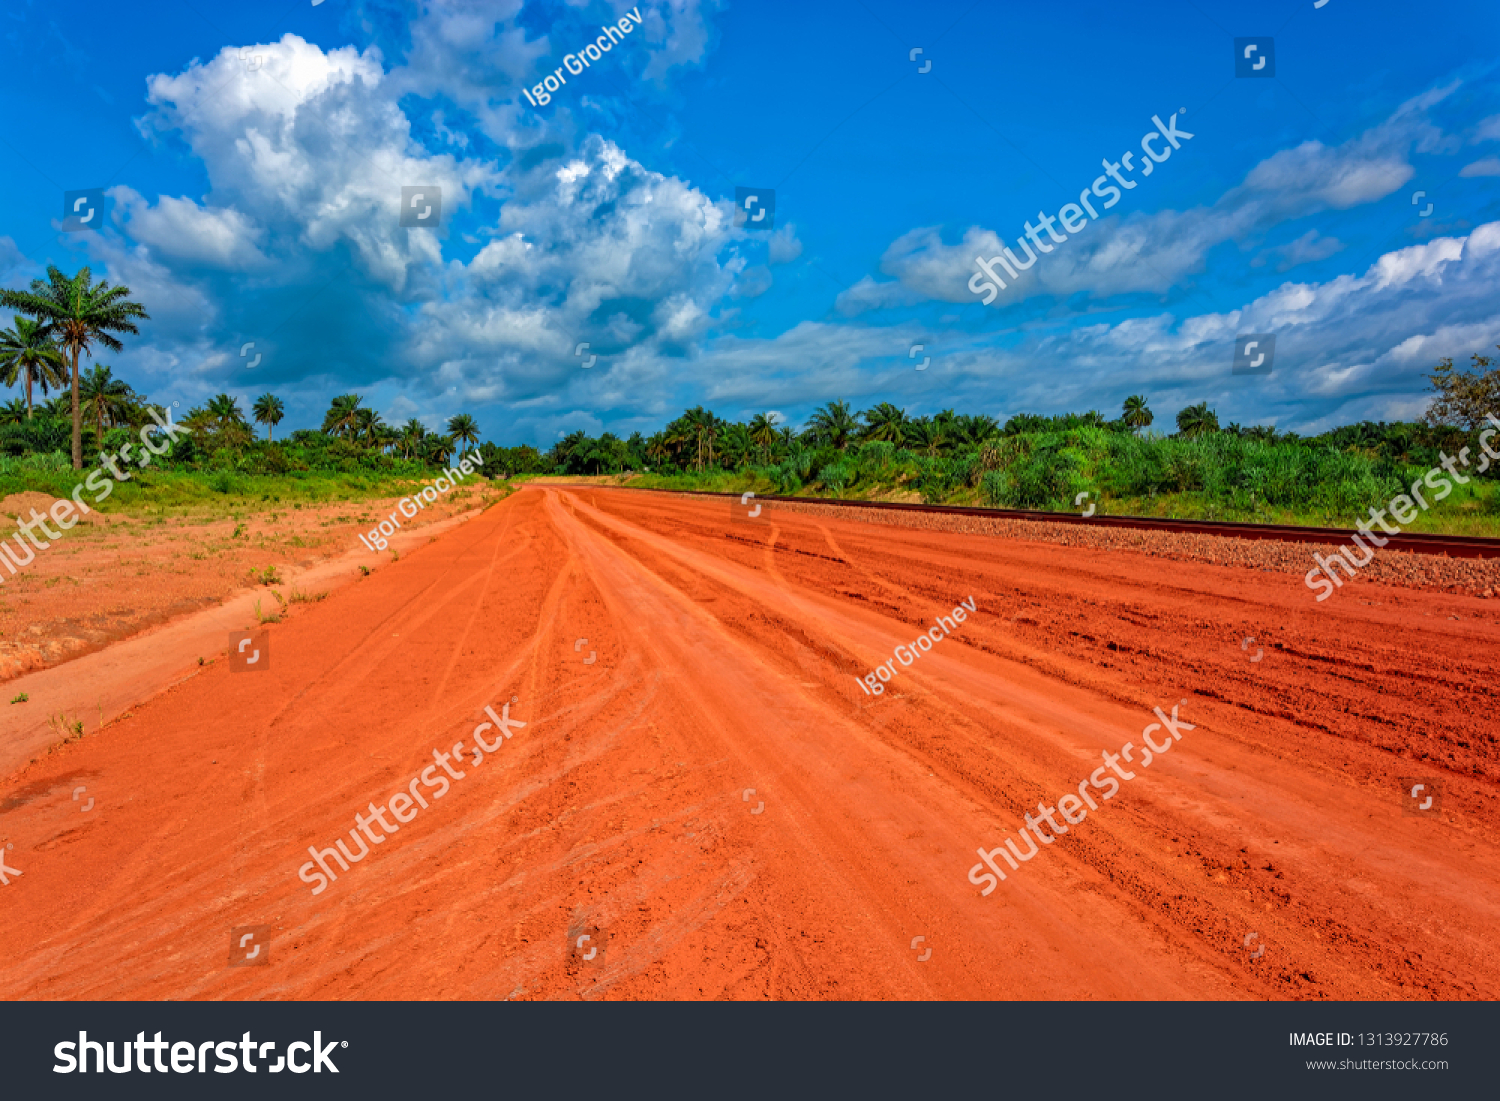 Typical red soils unpaved rough countryside road along railway track in Guinea, West Africa. #1313927786